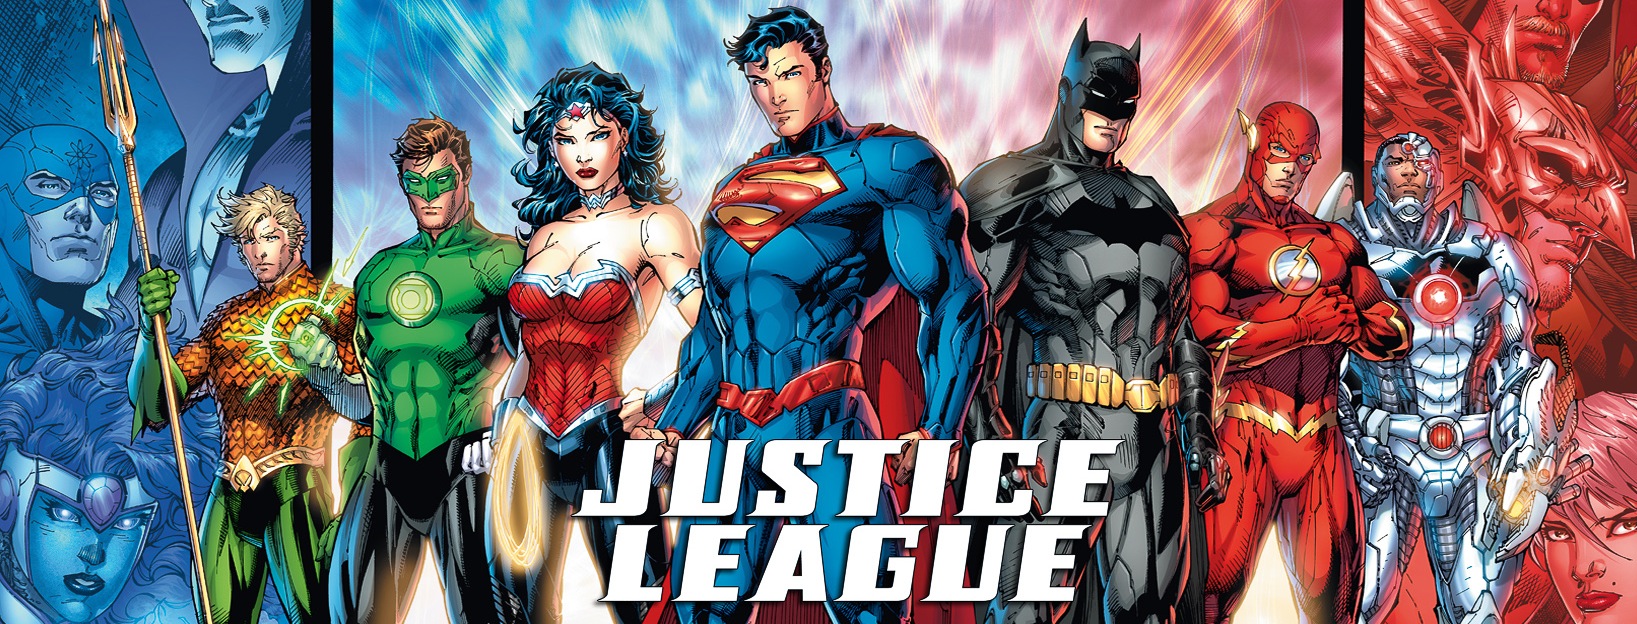 Justice Is Served Zach Snyder To Direct League Movie